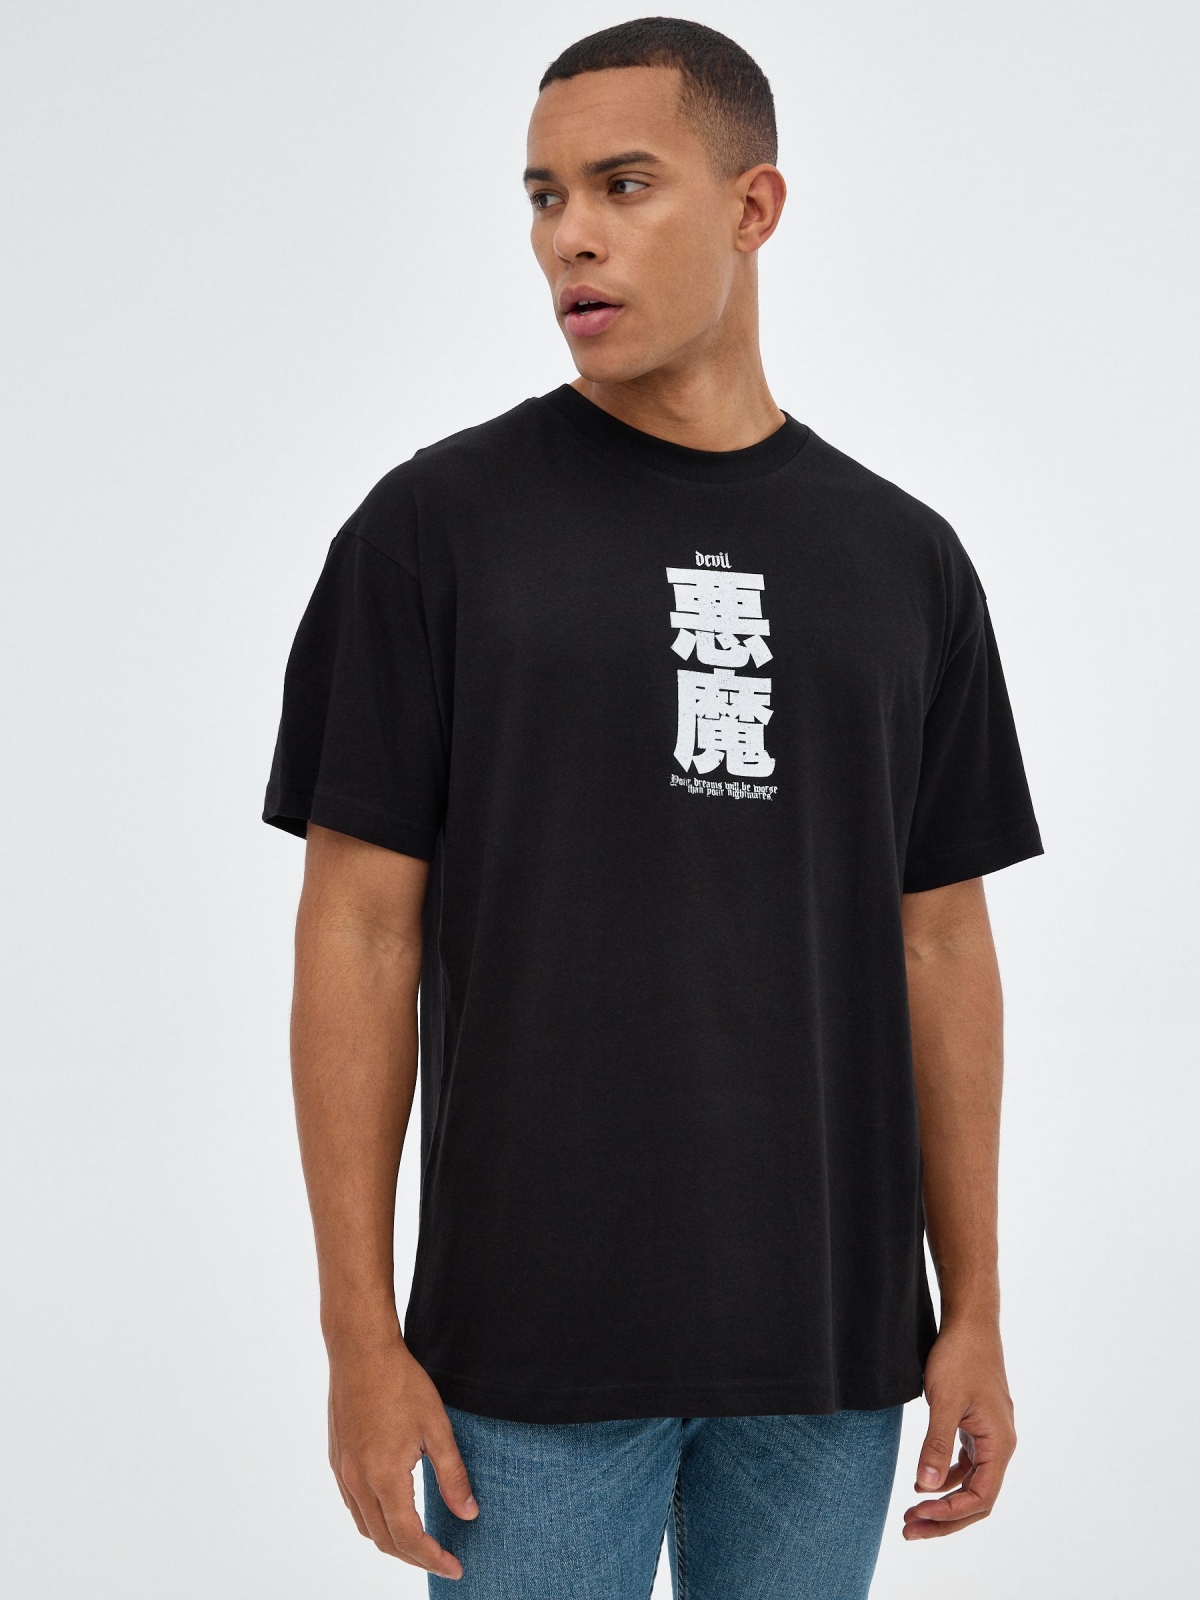 Japanese oversized T-shirt black middle front view